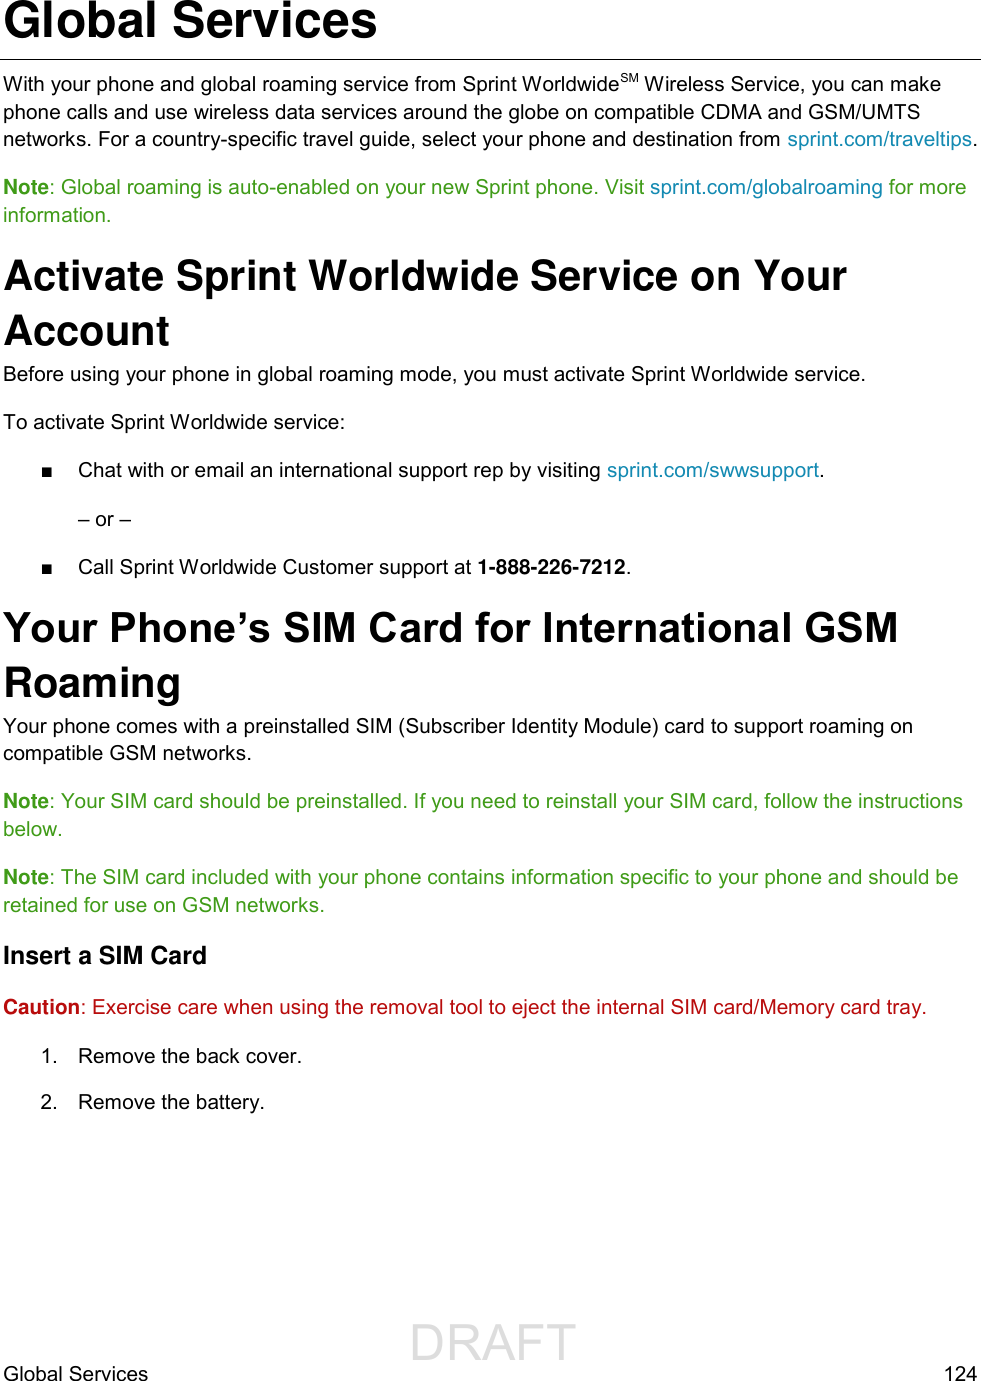                  DRAFT FOR INTERNAL USE ONLYGlobal Services  124 Global Services With your phone and global roaming service from Sprint WorldwideSM Wireless Service, you can make phone calls and use wireless data services around the globe on compatible CDMA and GSM/UMTS networks. For a country-specific travel guide, select your phone and destination from sprint.com/traveltips.  Note: Global roaming is auto-enabled on your new Sprint phone. Visit sprint.com/globalroaming for more information. Activate Sprint Worldwide Service on Your Account  Before using your phone in global roaming mode, you must activate Sprint Worldwide service.  To activate Sprint Worldwide service: ■  Chat with or email an international support rep by visiting sprint.com/swwsupport. – or – ■  Call Sprint Worldwide Customer support at 1-888-226-7212.  Your Phone’s SIM Card for International GSM Roaming  Your phone comes with a preinstalled SIM (Subscriber Identity Module) card to support roaming on compatible GSM networks. Note: Your SIM card should be preinstalled. If you need to reinstall your SIM card, follow the instructions below.  Note: The SIM card included with your phone contains information specific to your phone and should be retained for use on GSM networks. Insert a SIM Card Caution: Exercise care when using the removal tool to eject the internal SIM card/Memory card tray. 1.  Remove the back cover. 2.  Remove the battery. 